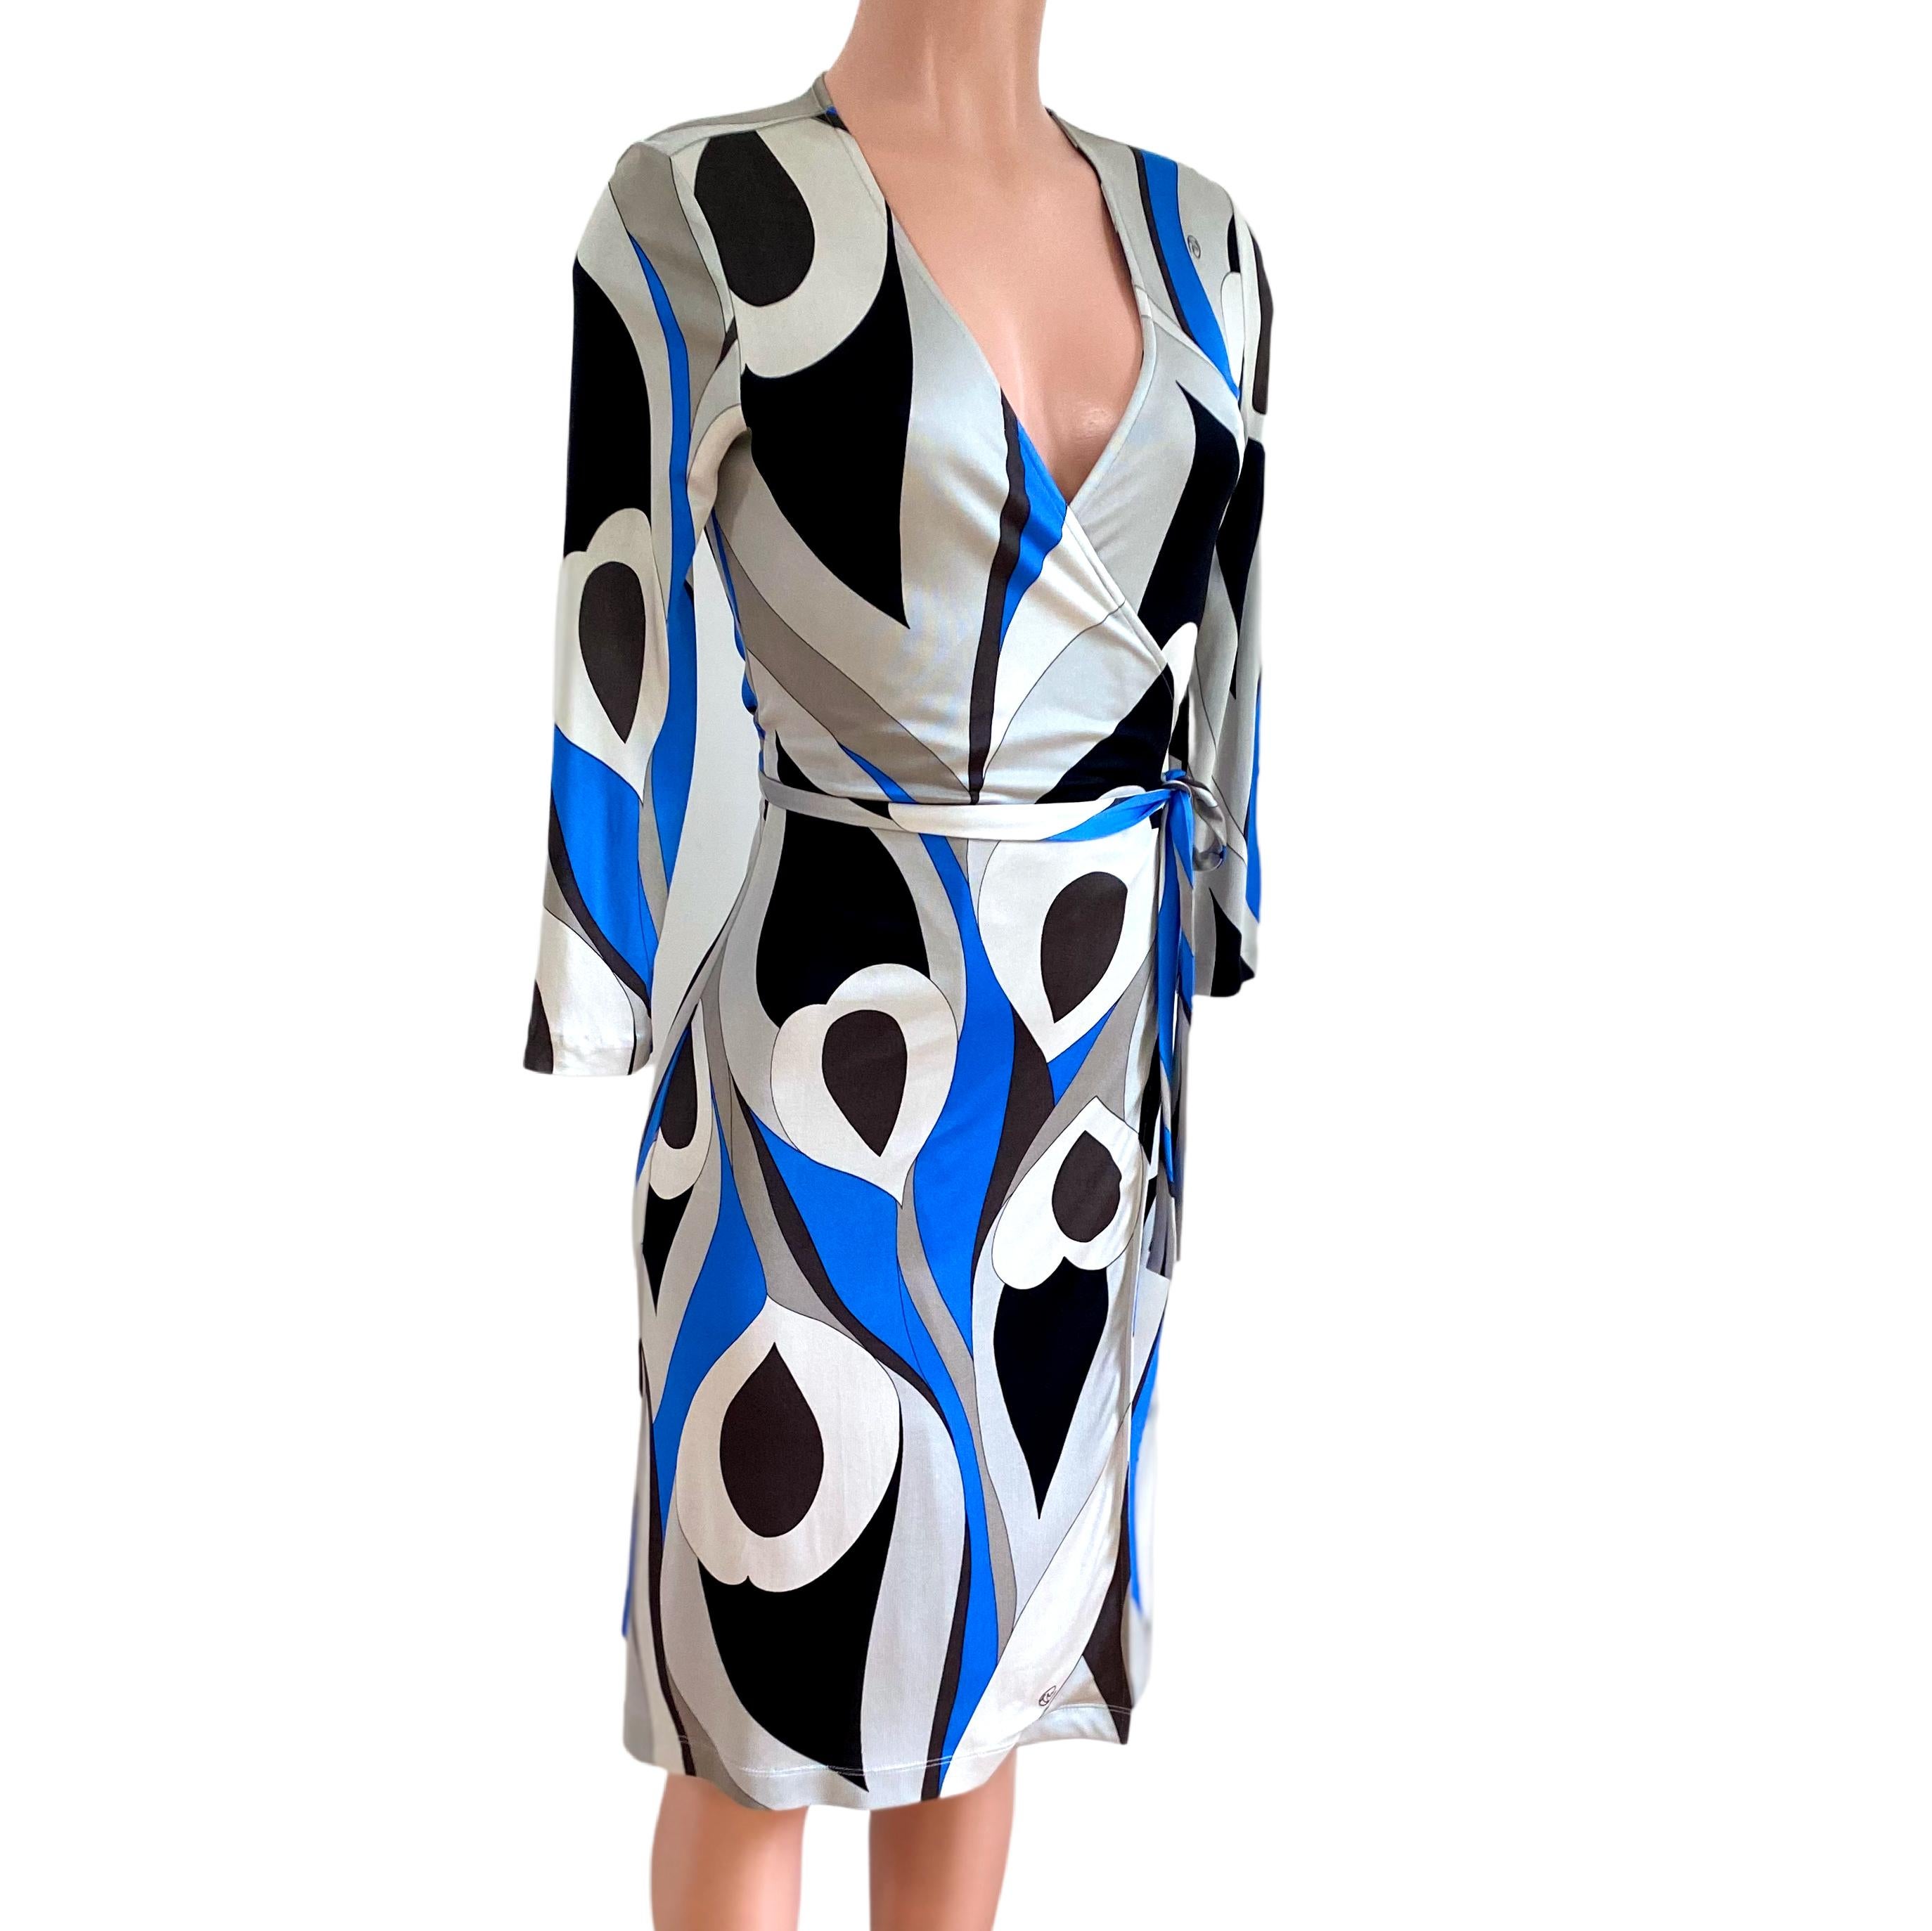 True wrap dress in abstract black, gray and blue feather print on buttery silk jersey.
Authentic FLORA KUNG silk dresses are made in premiere quality, long-filament silk yarn which gives a natural simmering glow and a buttery, luxurious feel. 
US 4